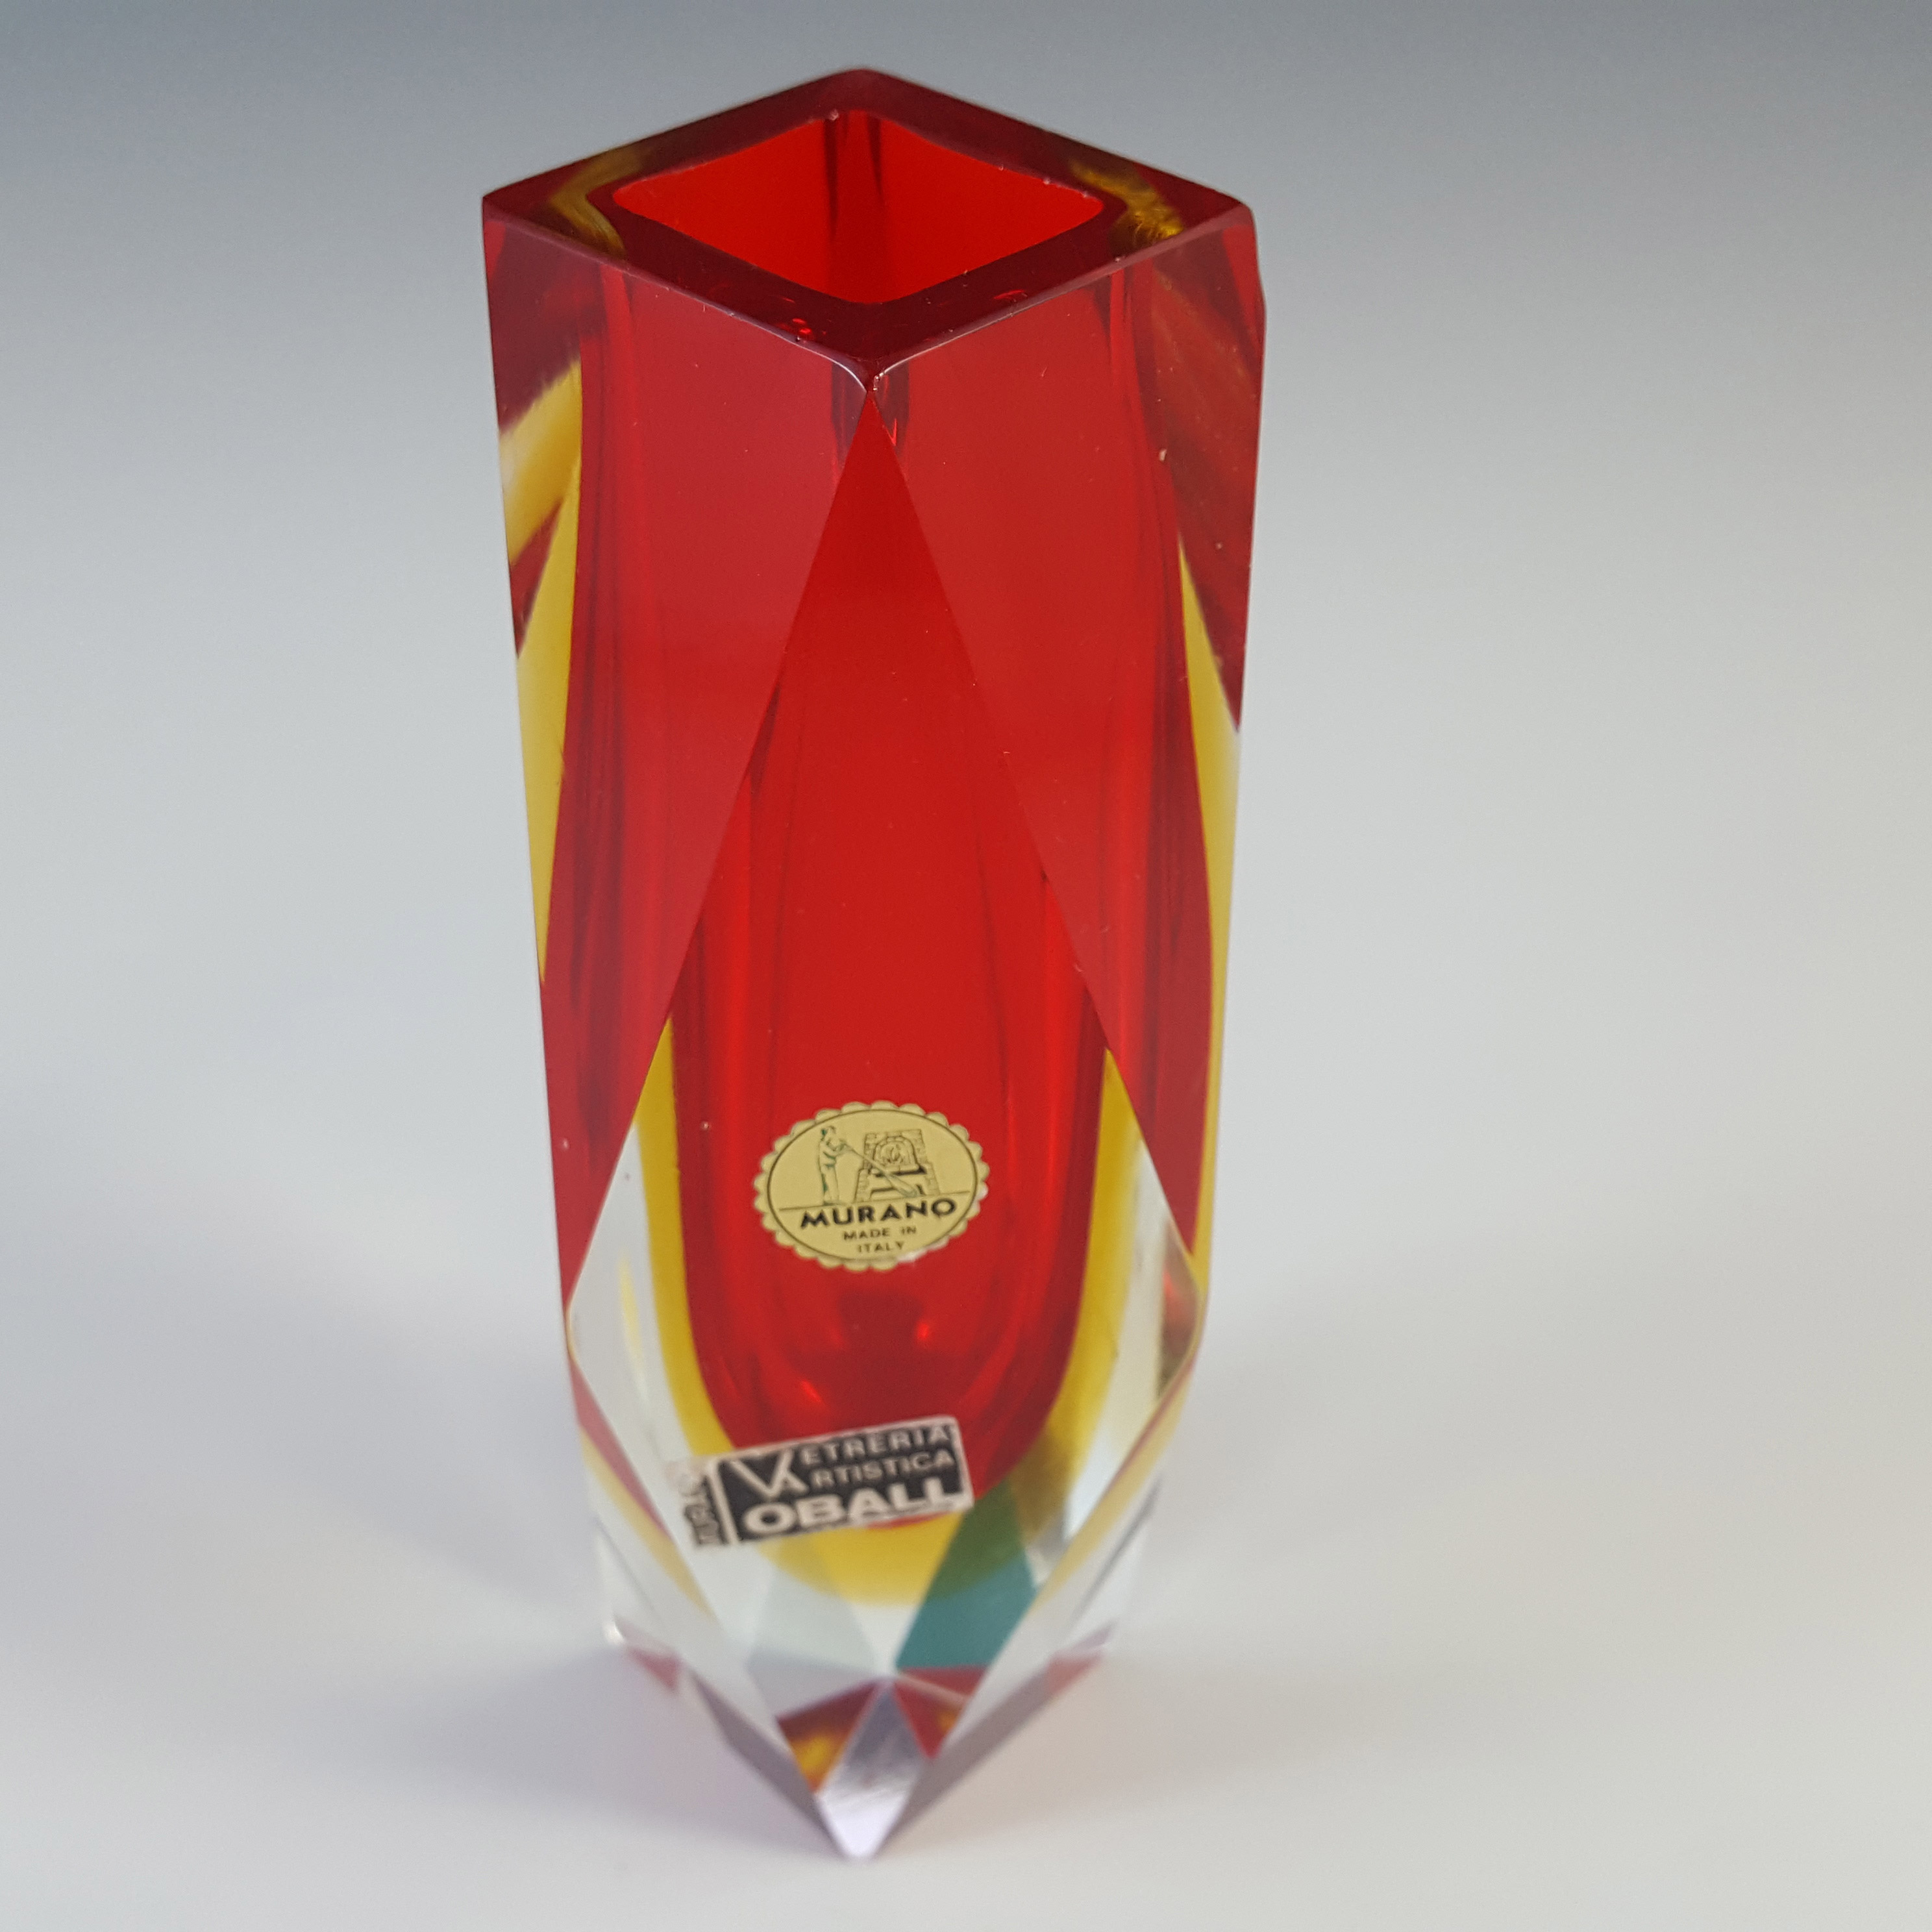 LABELLED Oball Murano Faceted Red & Amber Sommerso Glass Vase - Click Image to Close